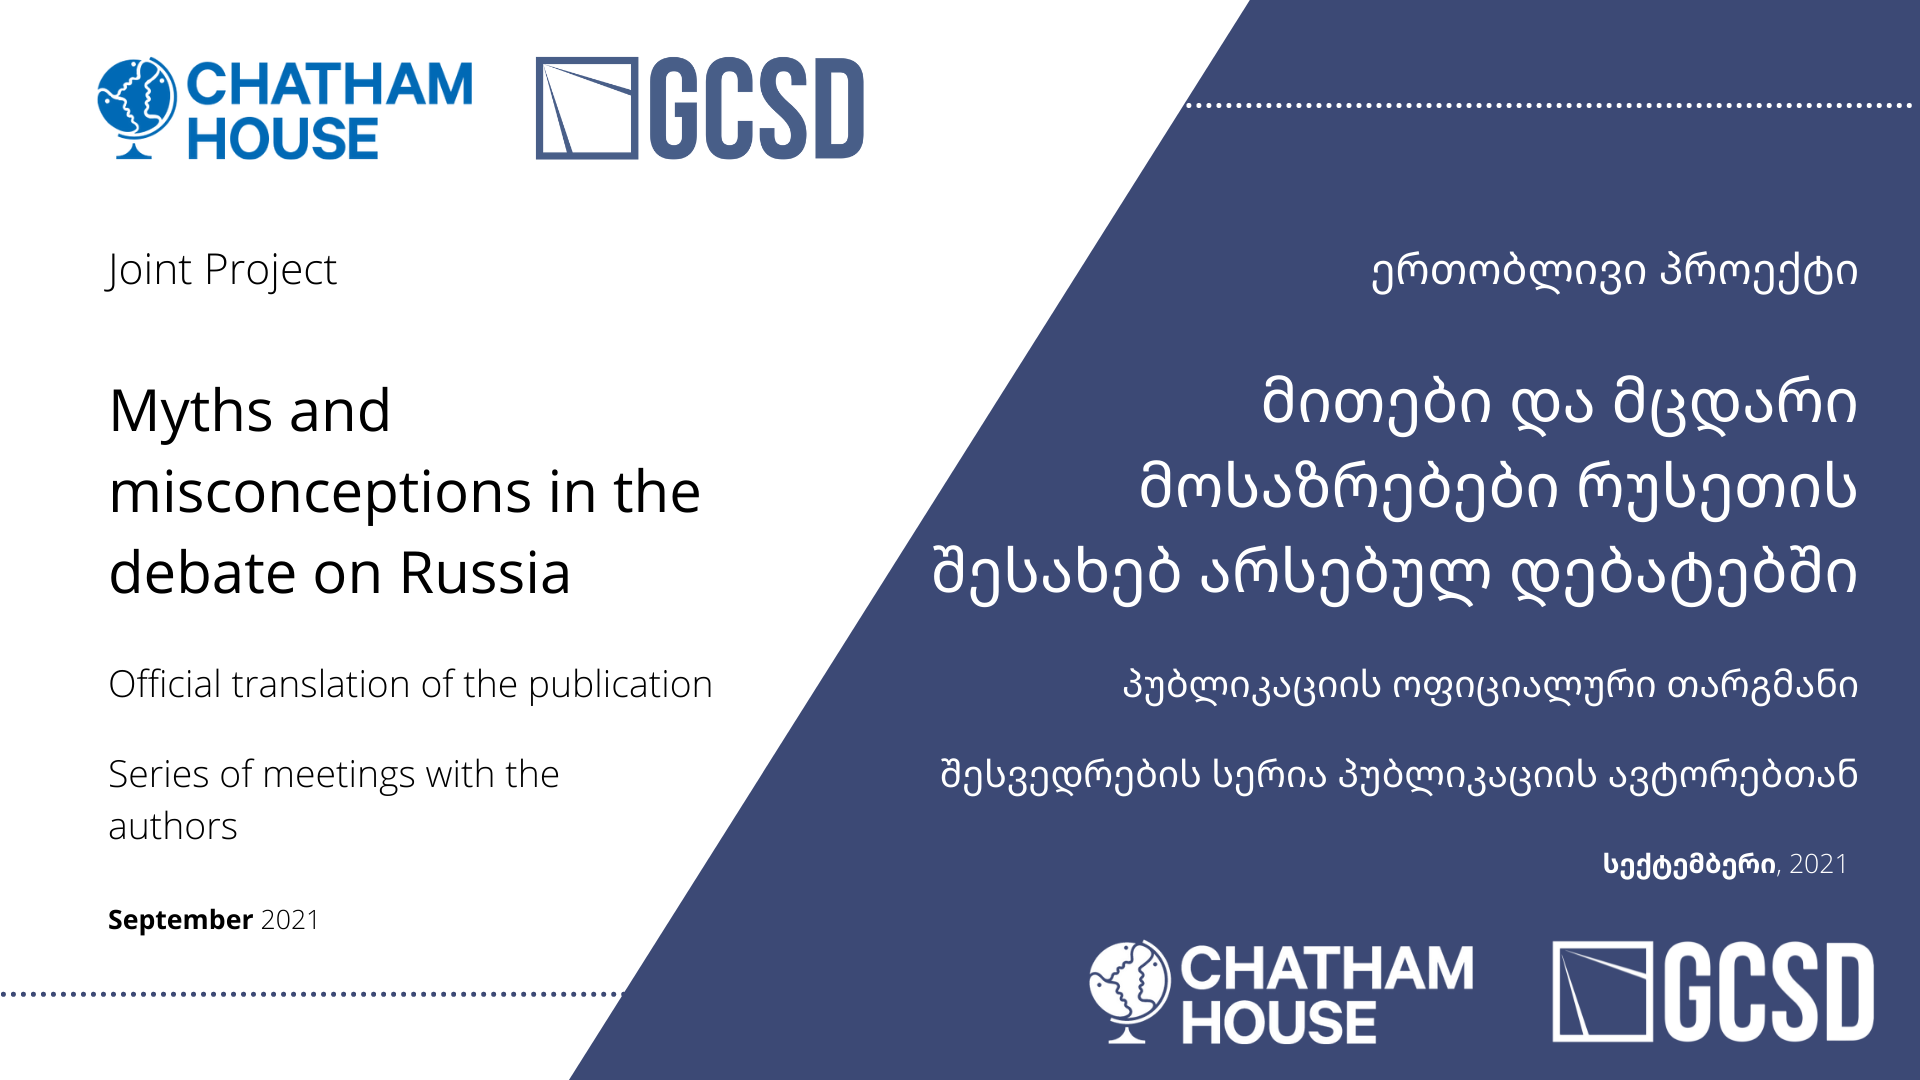 GCSD is delighted to announce a partnership with Chatham House